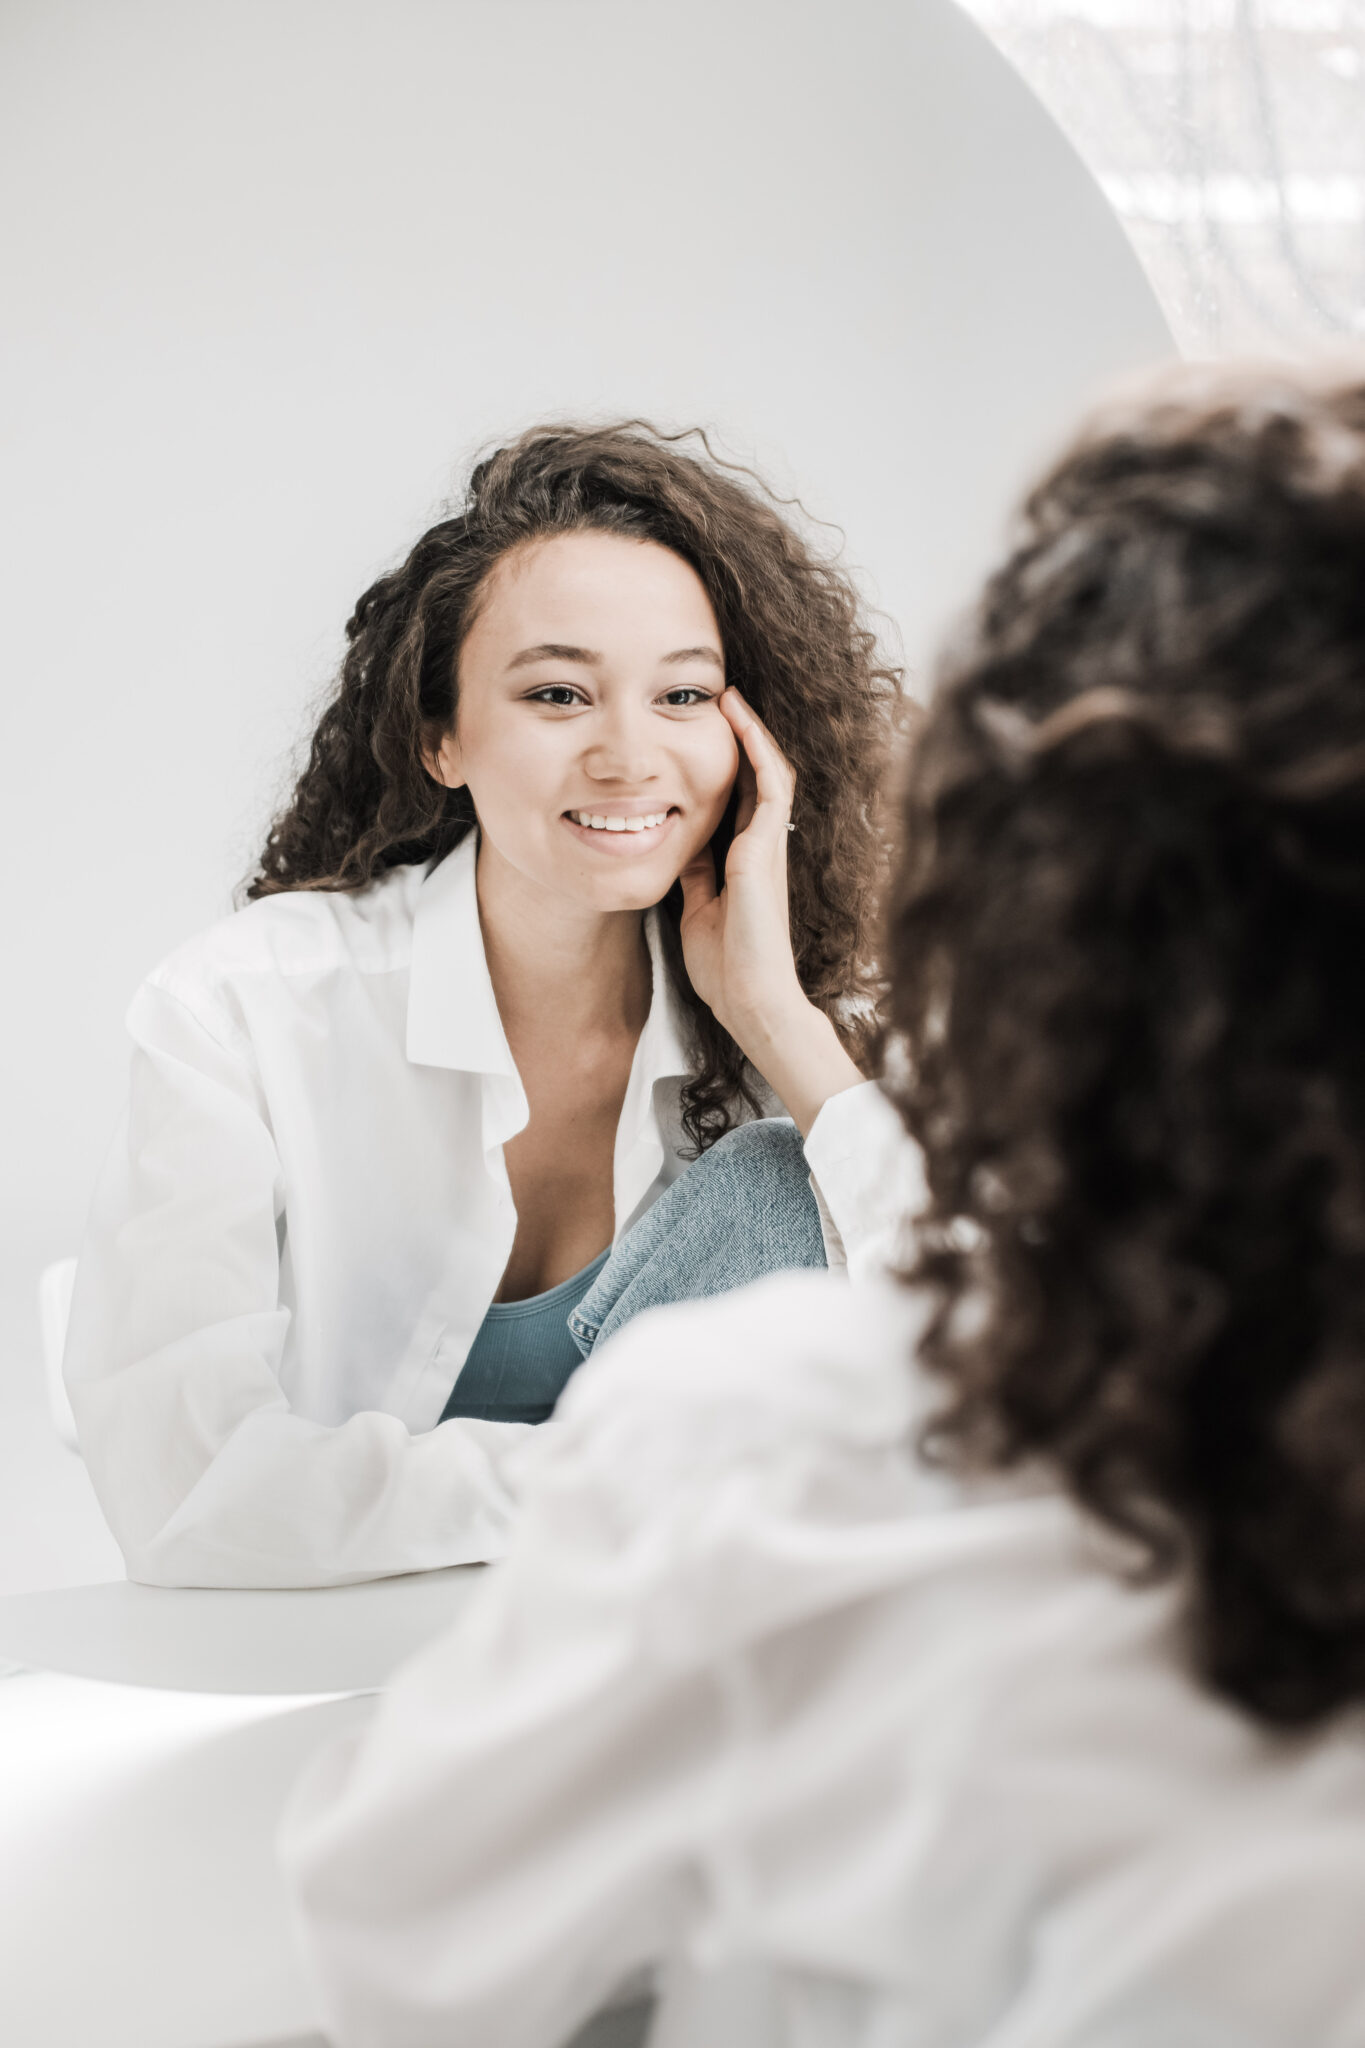 A beautiful curly-haired woman looks in the mirror at her reflection and smiles. This article covers the best confidence boosters for women.